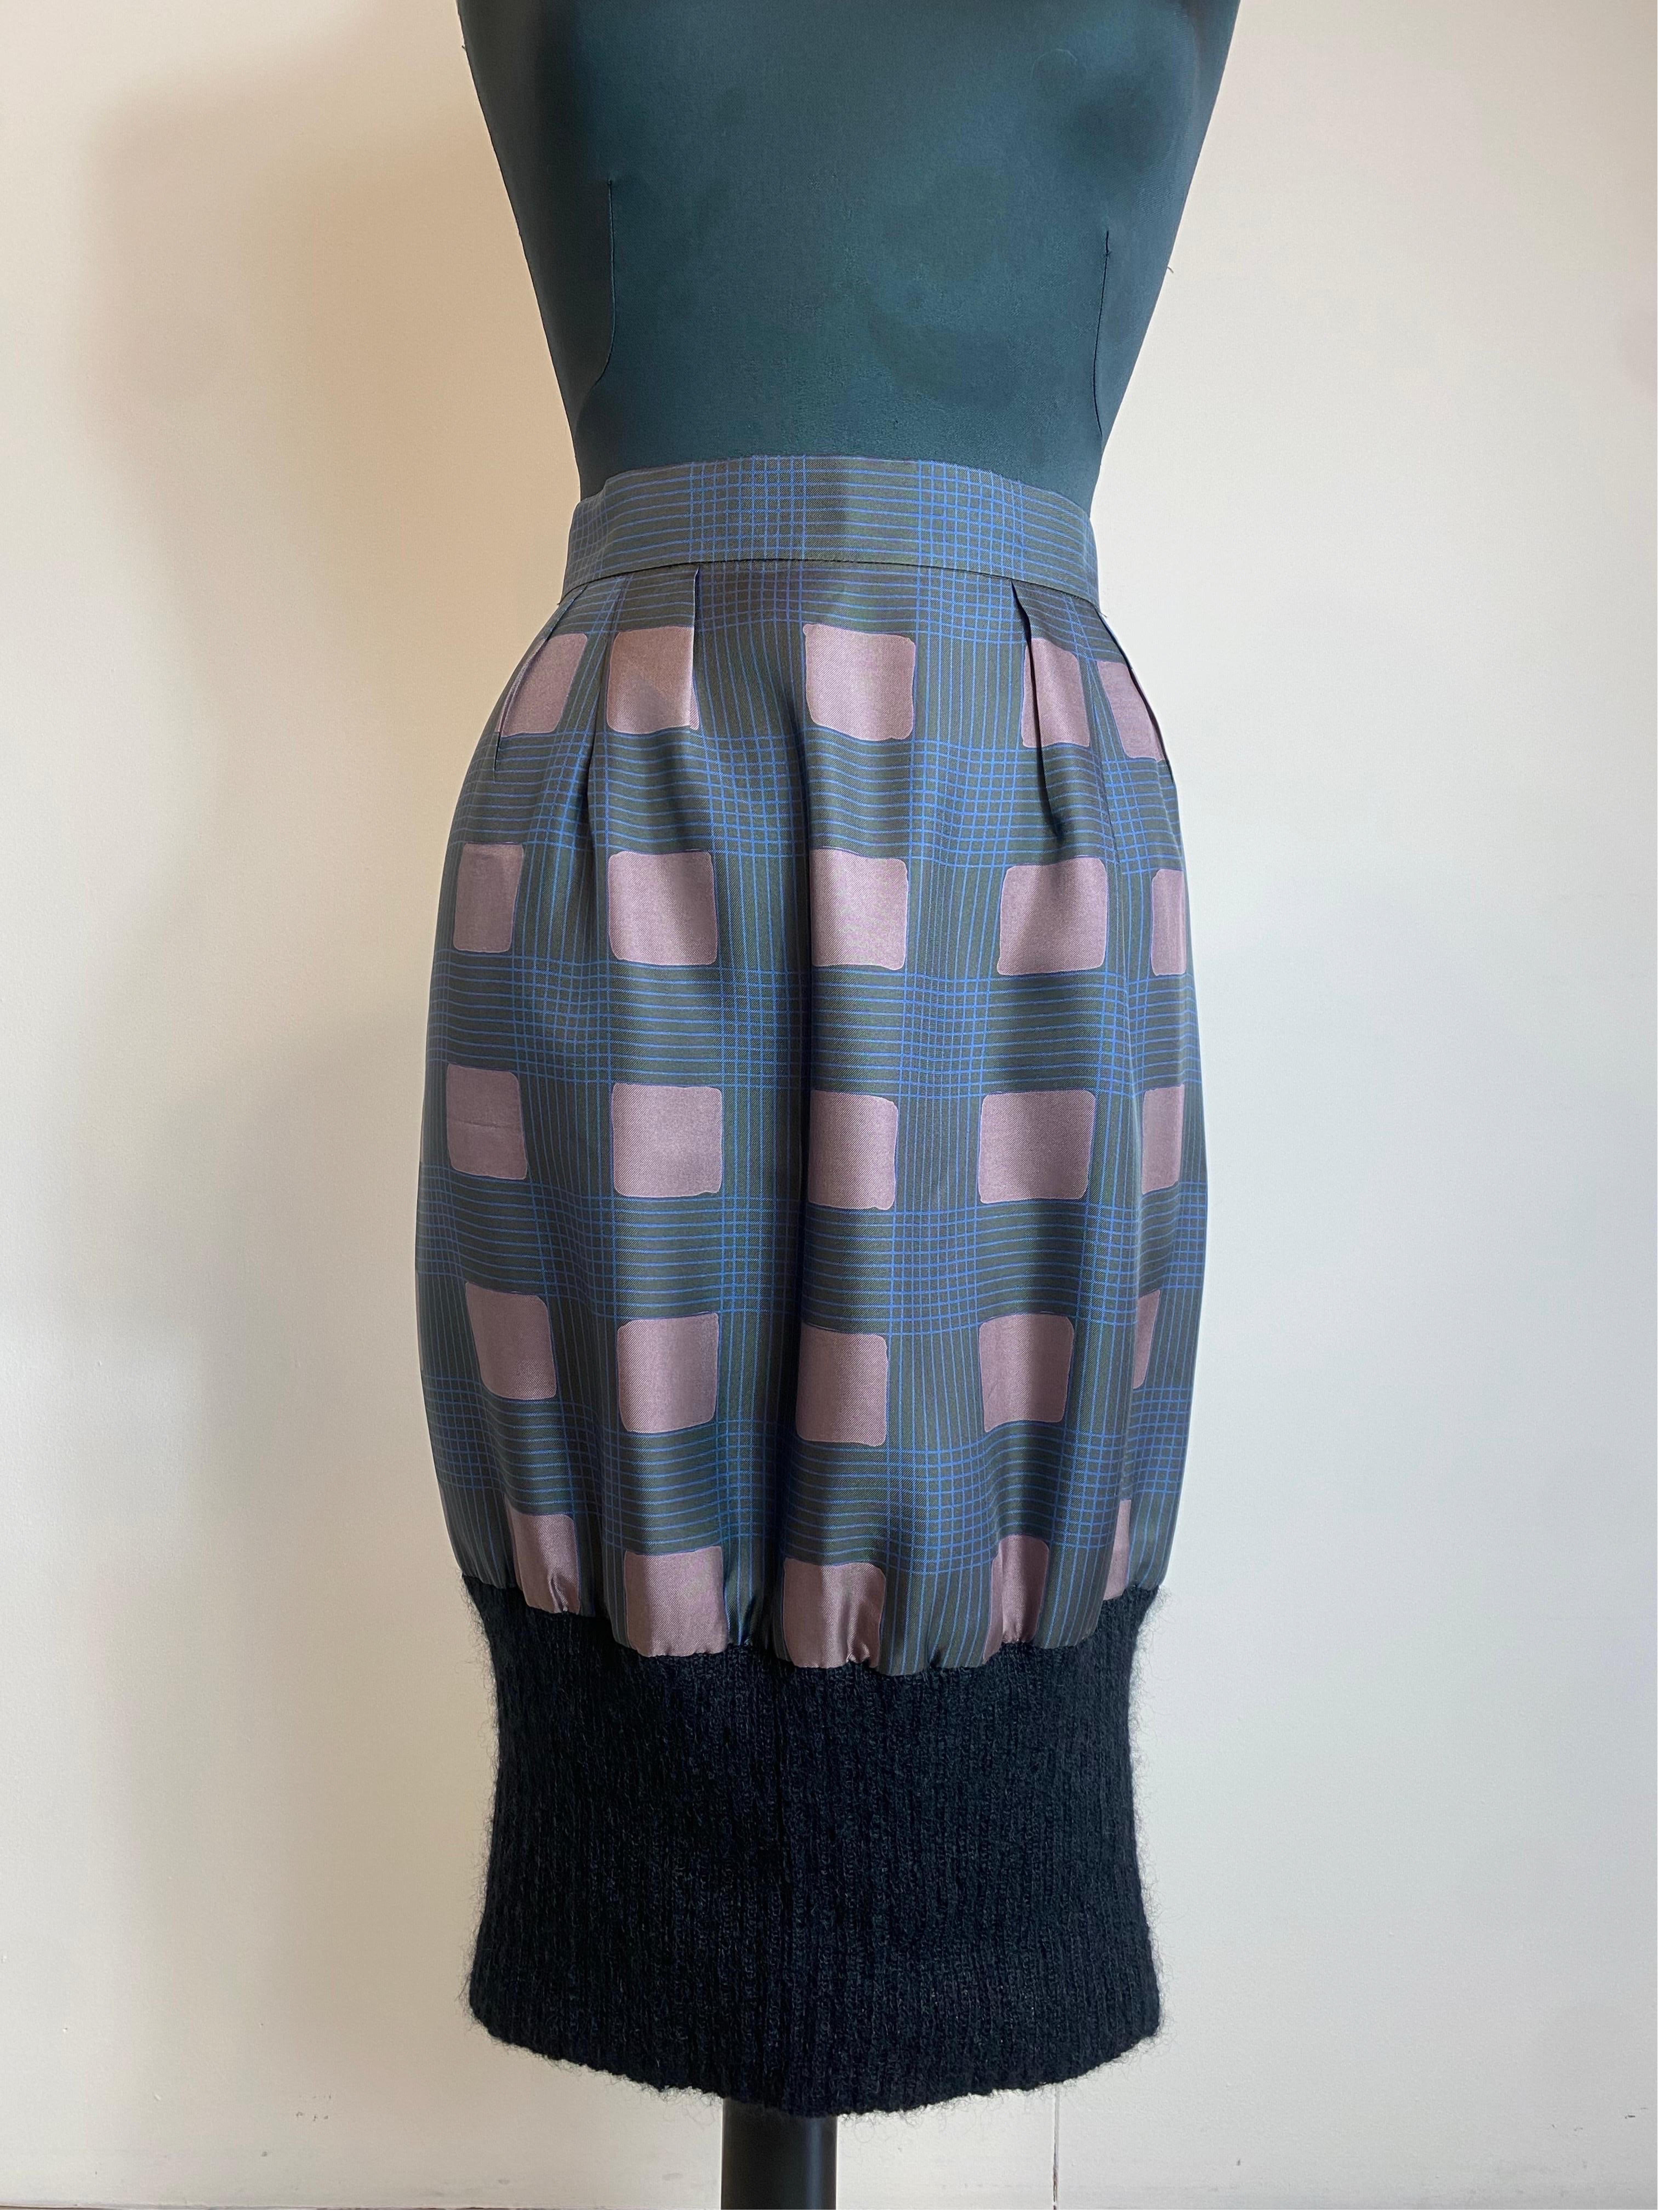 Dries Van Noten sheath skirt.
In 100% silk with wool inserts.
Size 36 French.
Waist 37 cm
Hips 53 cm
Length 65 cm
Excellent general condition, with minimal signs of normal use and some pulled threads.